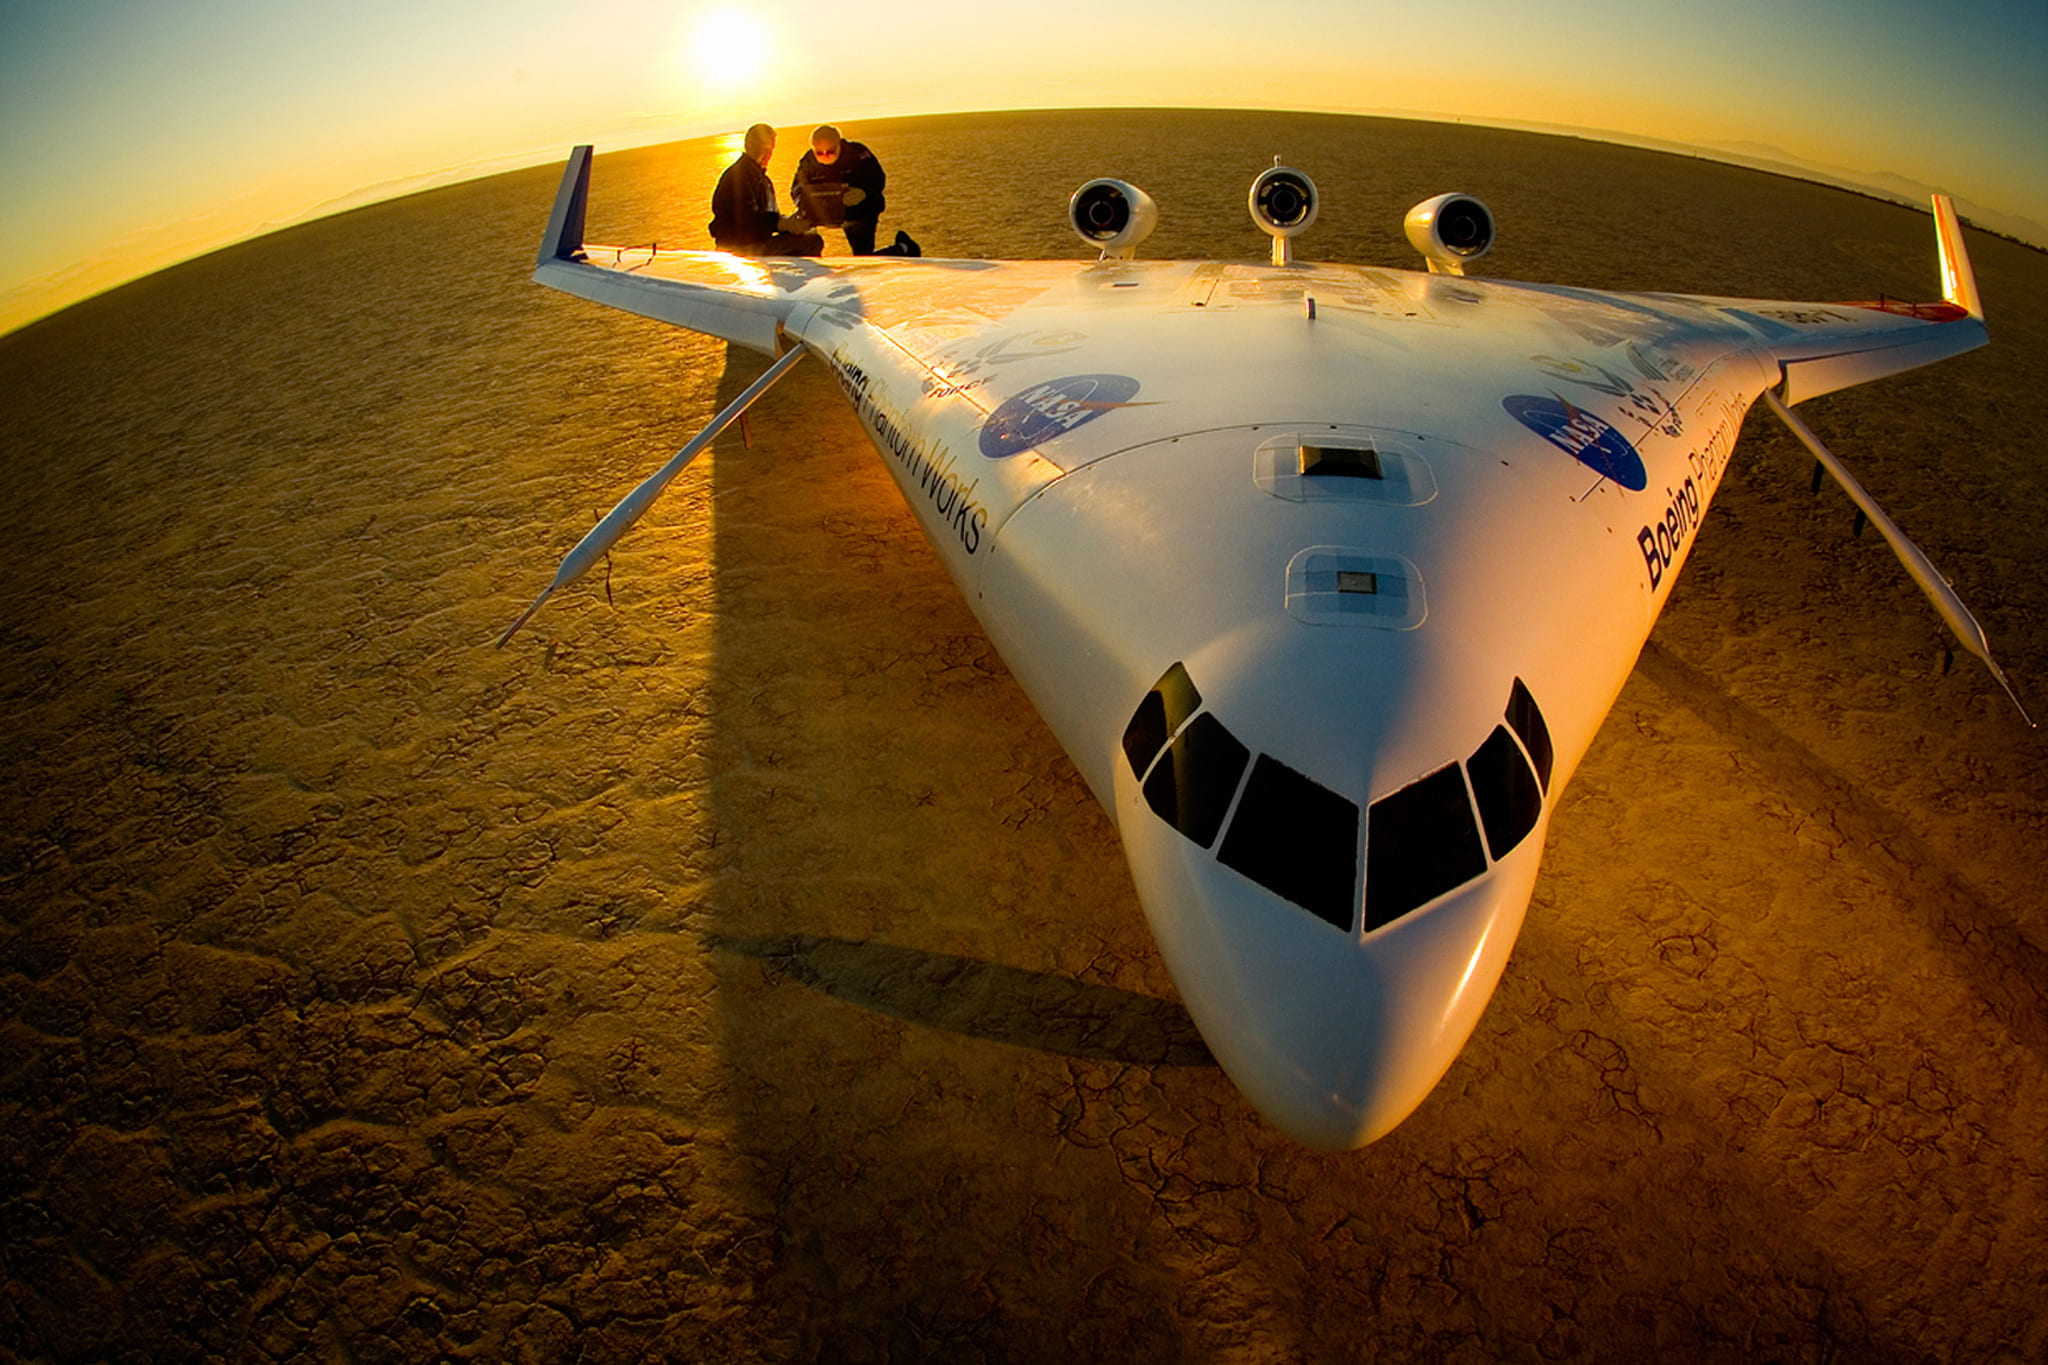 Prototype of the blended-wing-body jet